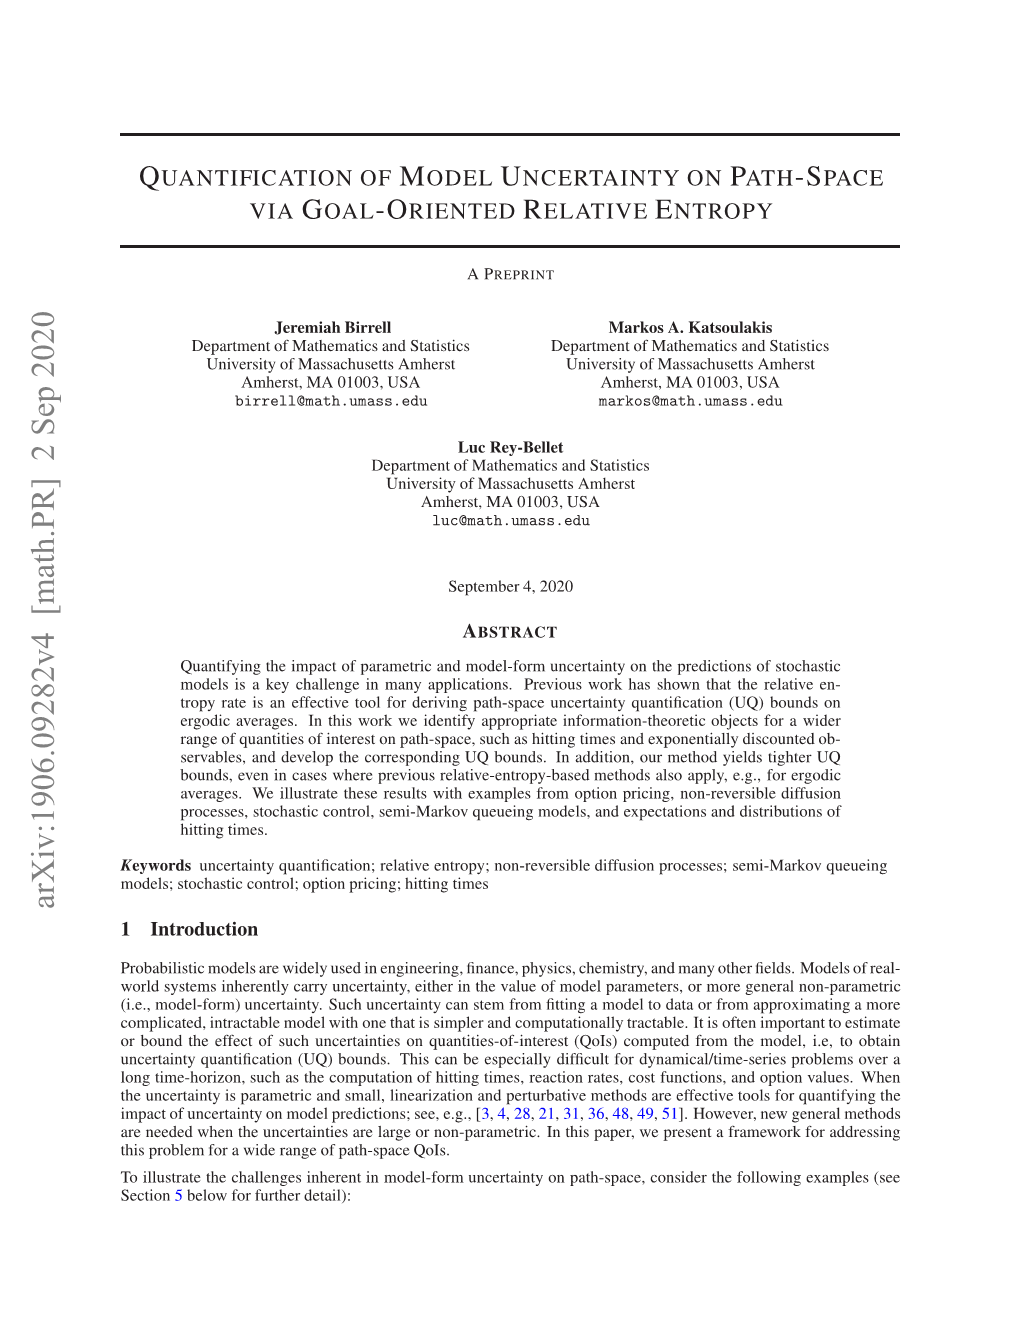 Quantification of Model Uncertainty on Path-Space Via Goal-Oriented